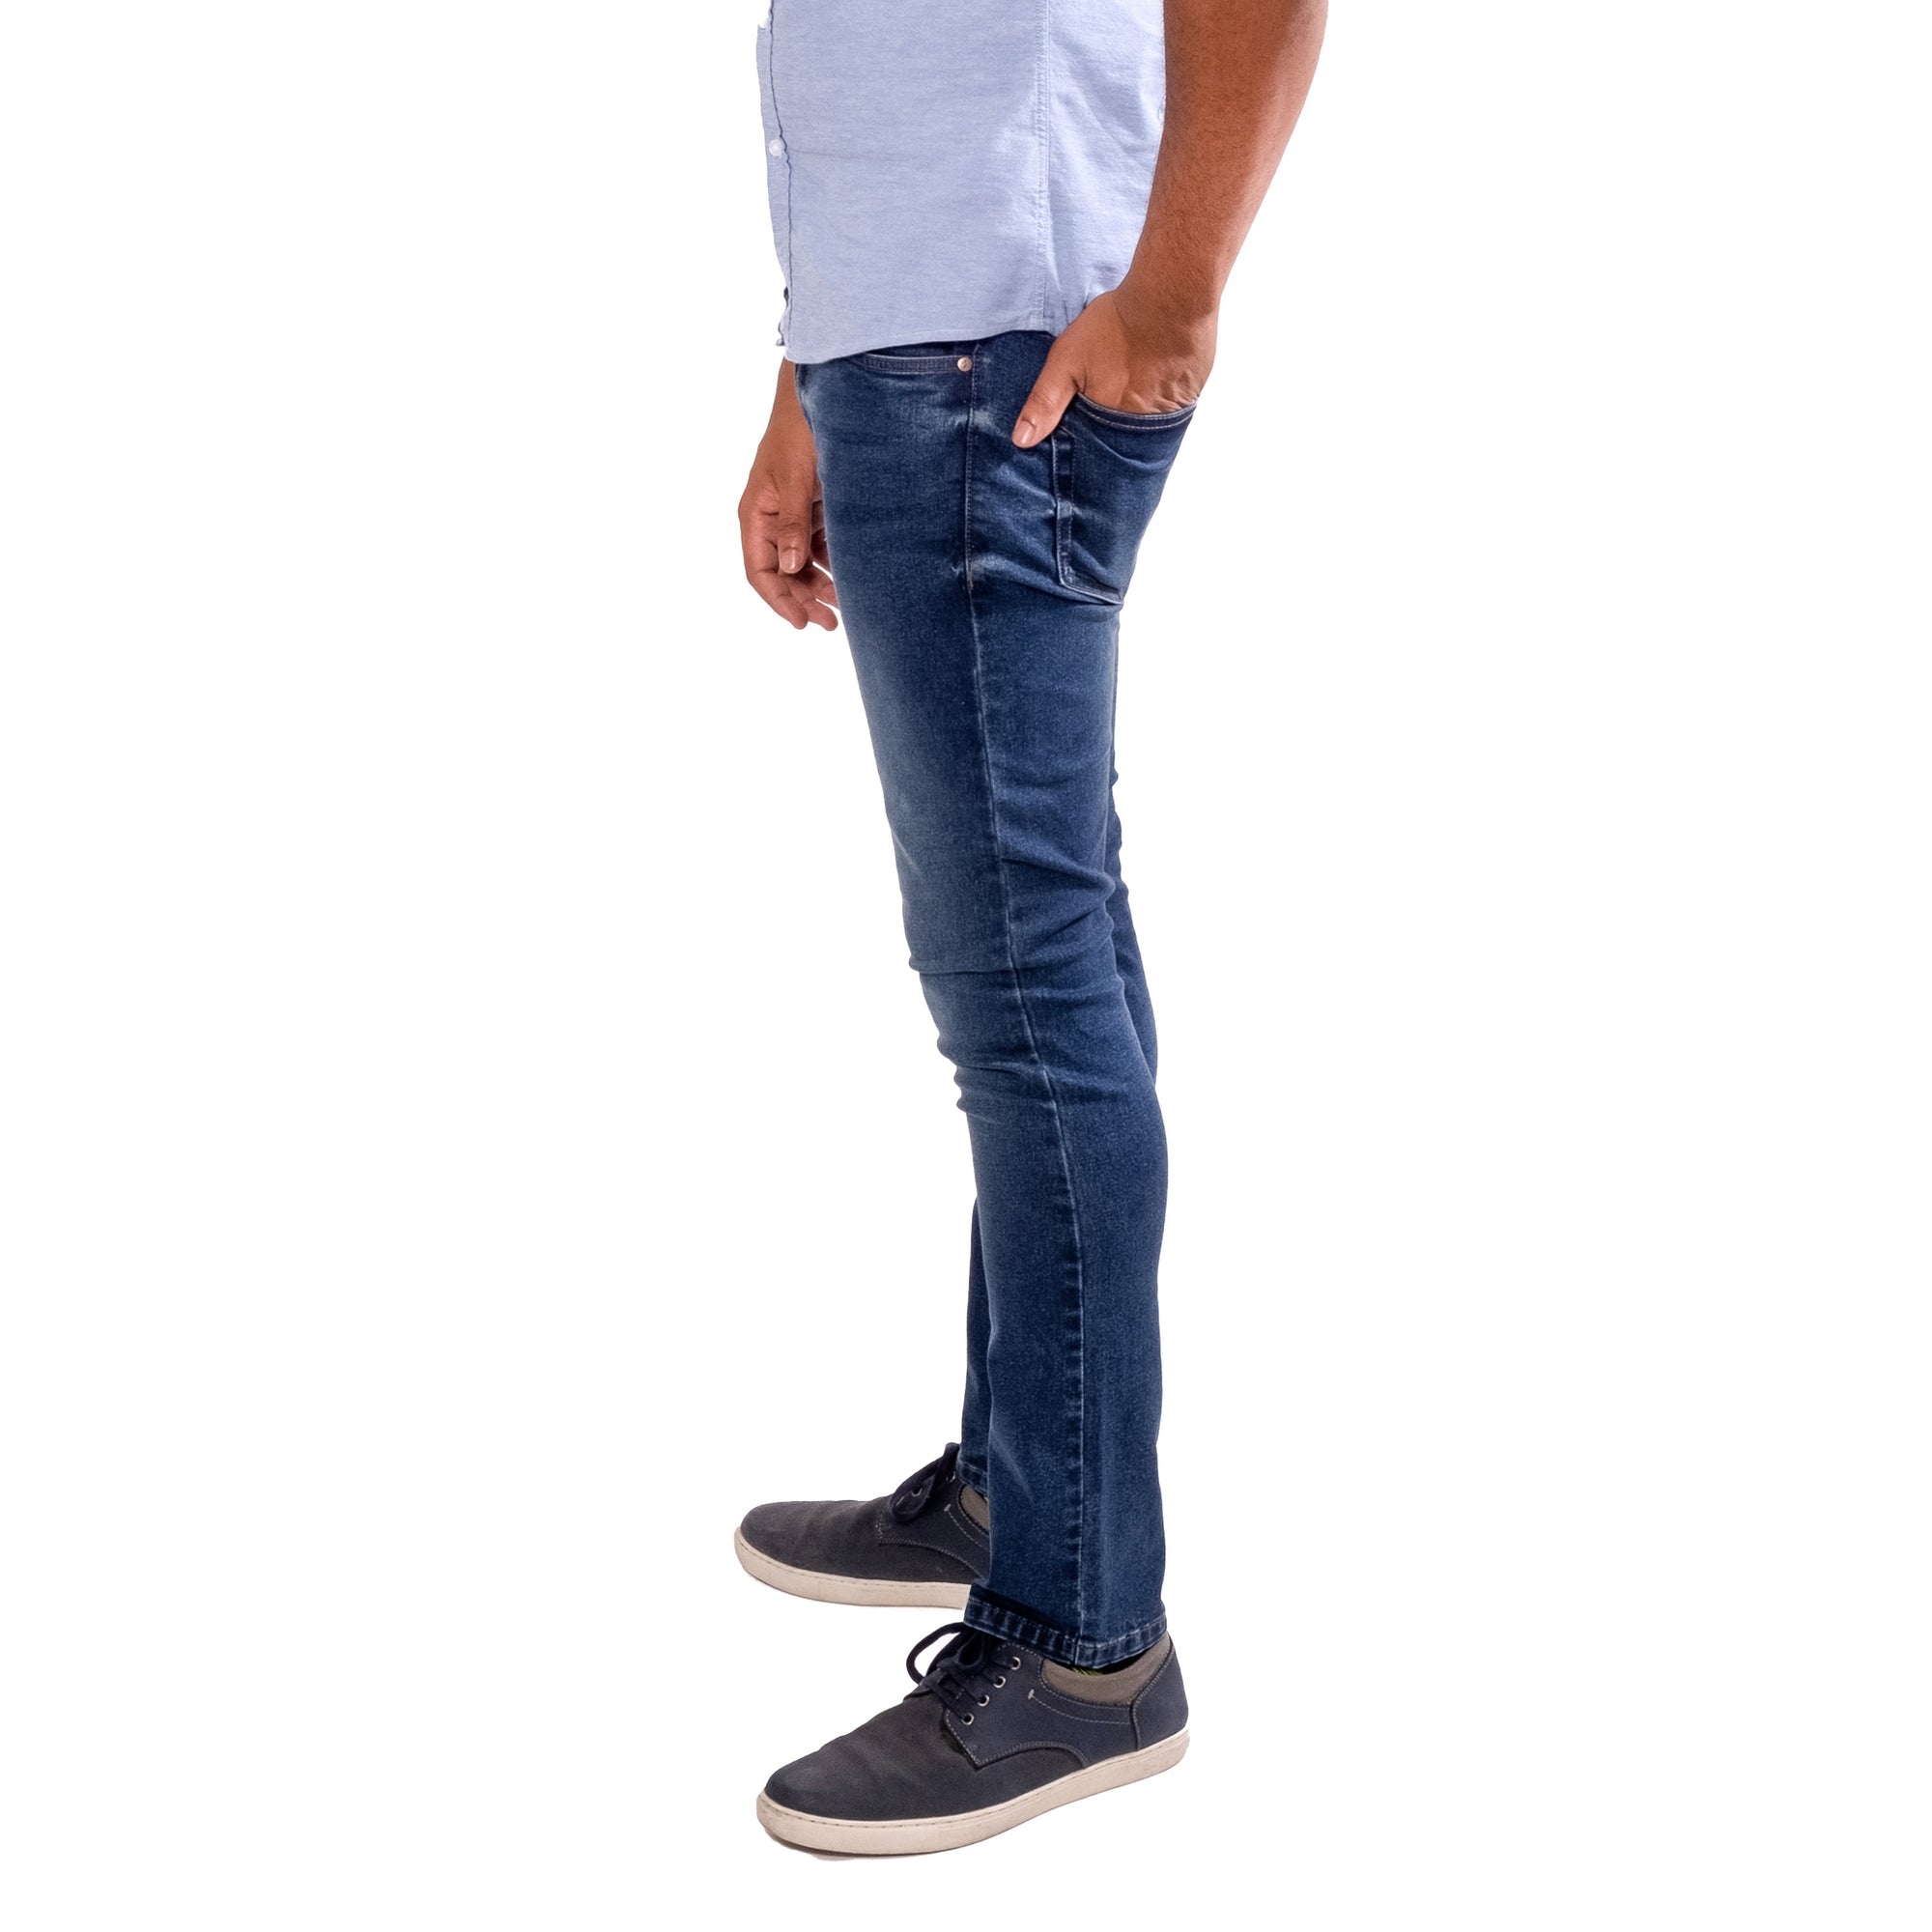 Skinny Fit / The Perfect | Jean Admiral Blue Jeans - Medium